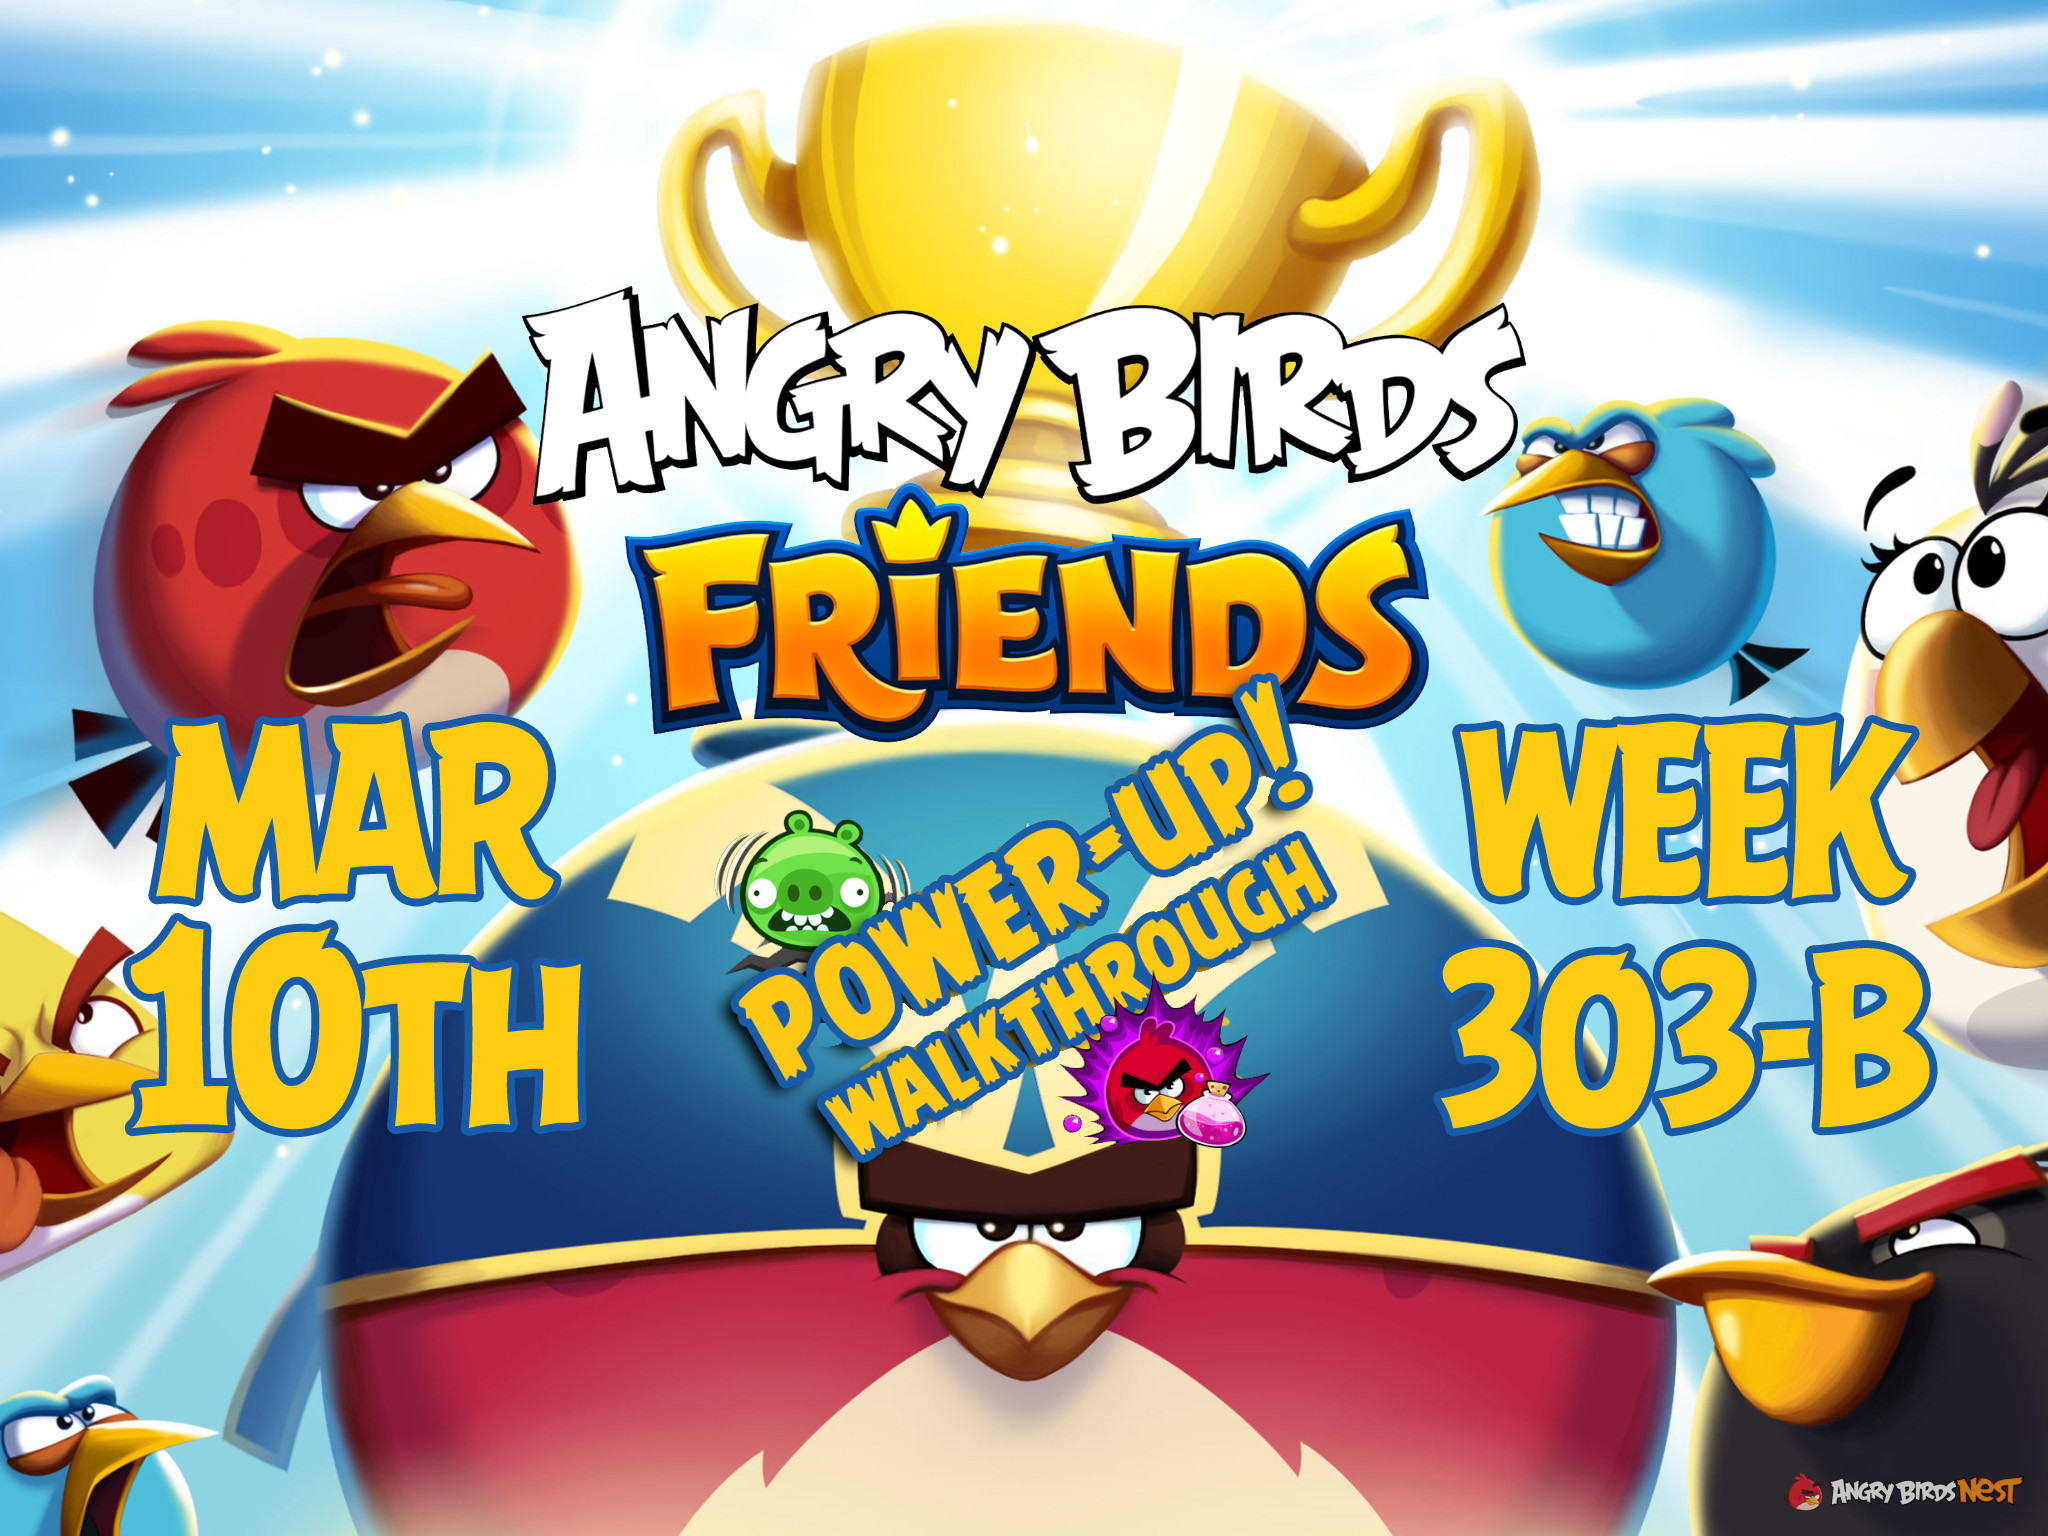 Angry Birds Friends Tournament Week 303-B Feature Image PU